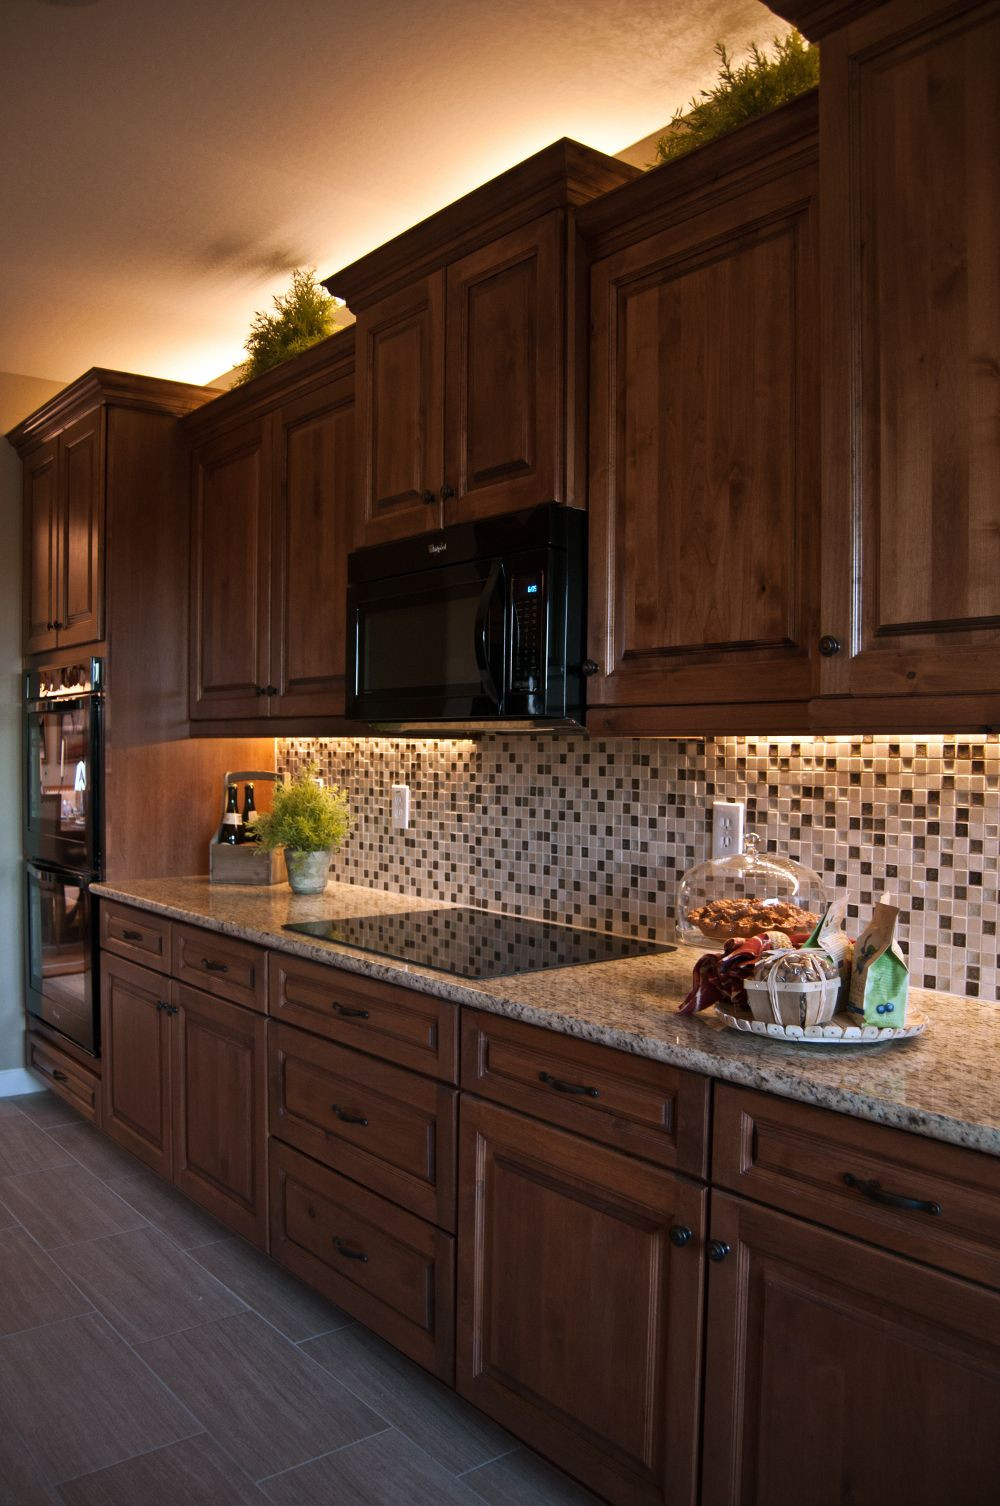 Kitchen Under Cabinet Lighting Options
 Kitchen LED lights I like the downlights but not the